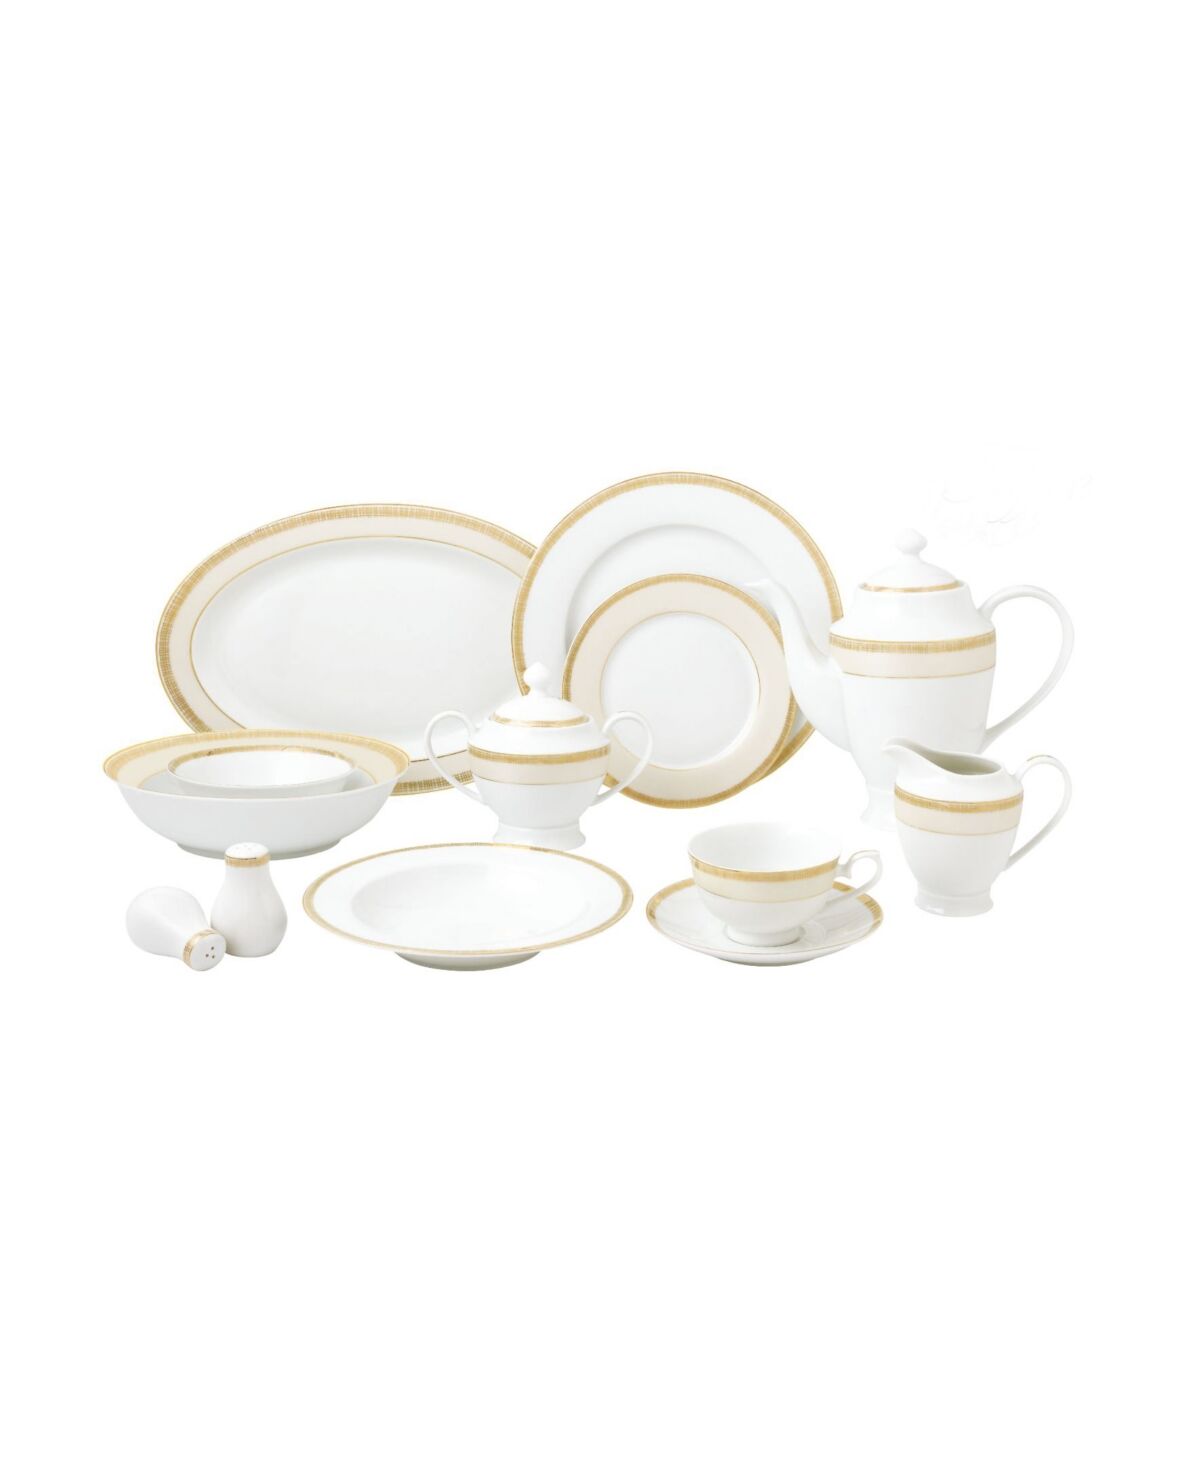 Lorren Home Trends 57 Piece Mix and Match Bone China Dinnerware Set, Service for 8 - Gold-Tone